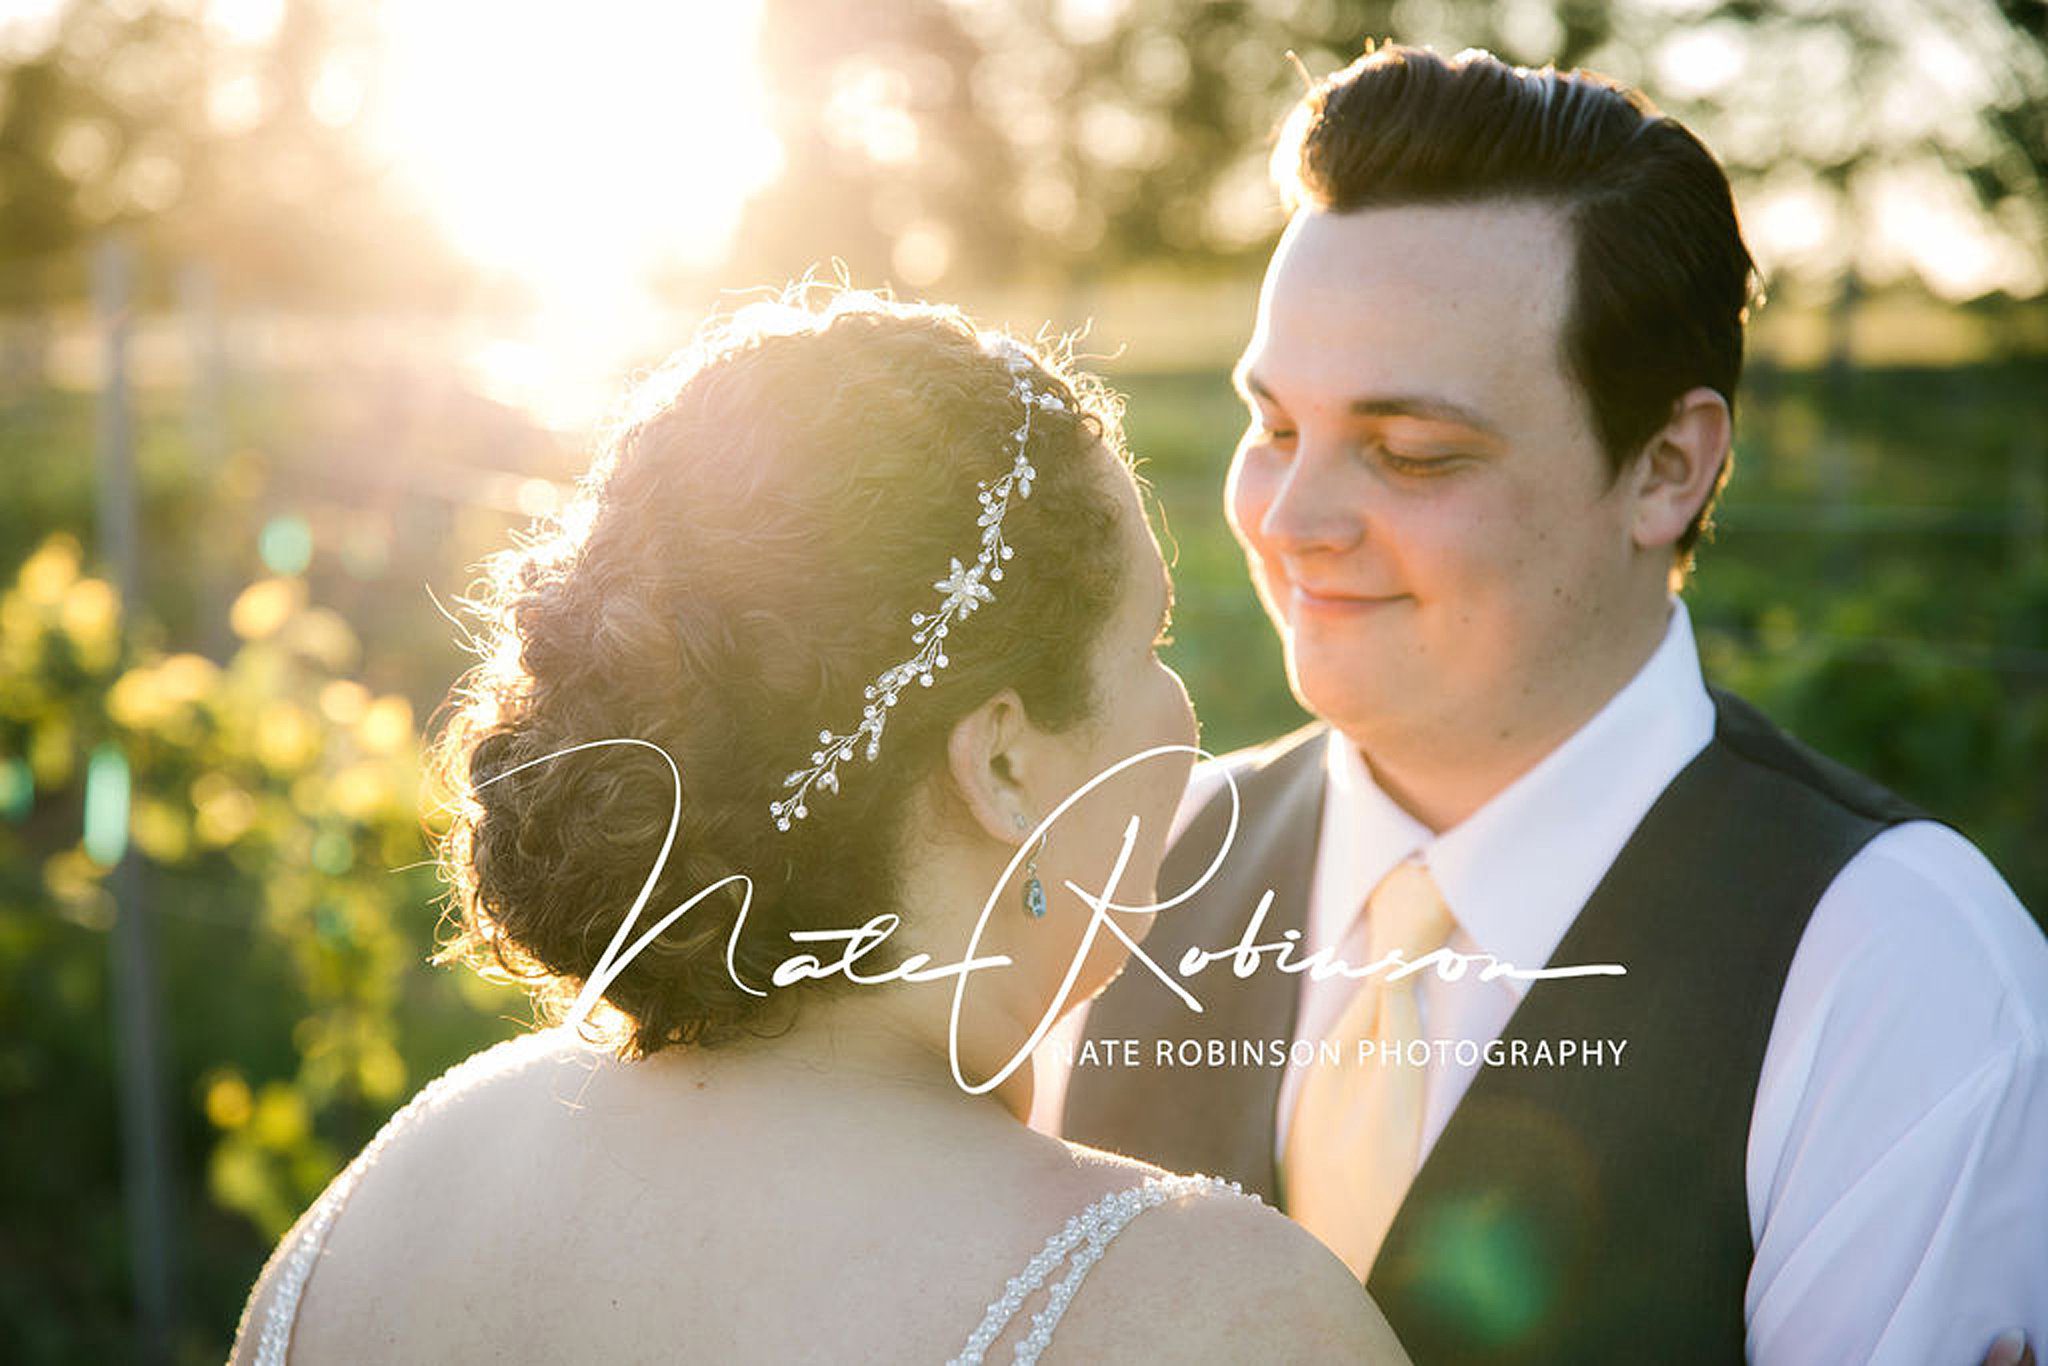 Bride wearing diamond hair piece stands in the sun with groom wearing yellow tie and vest